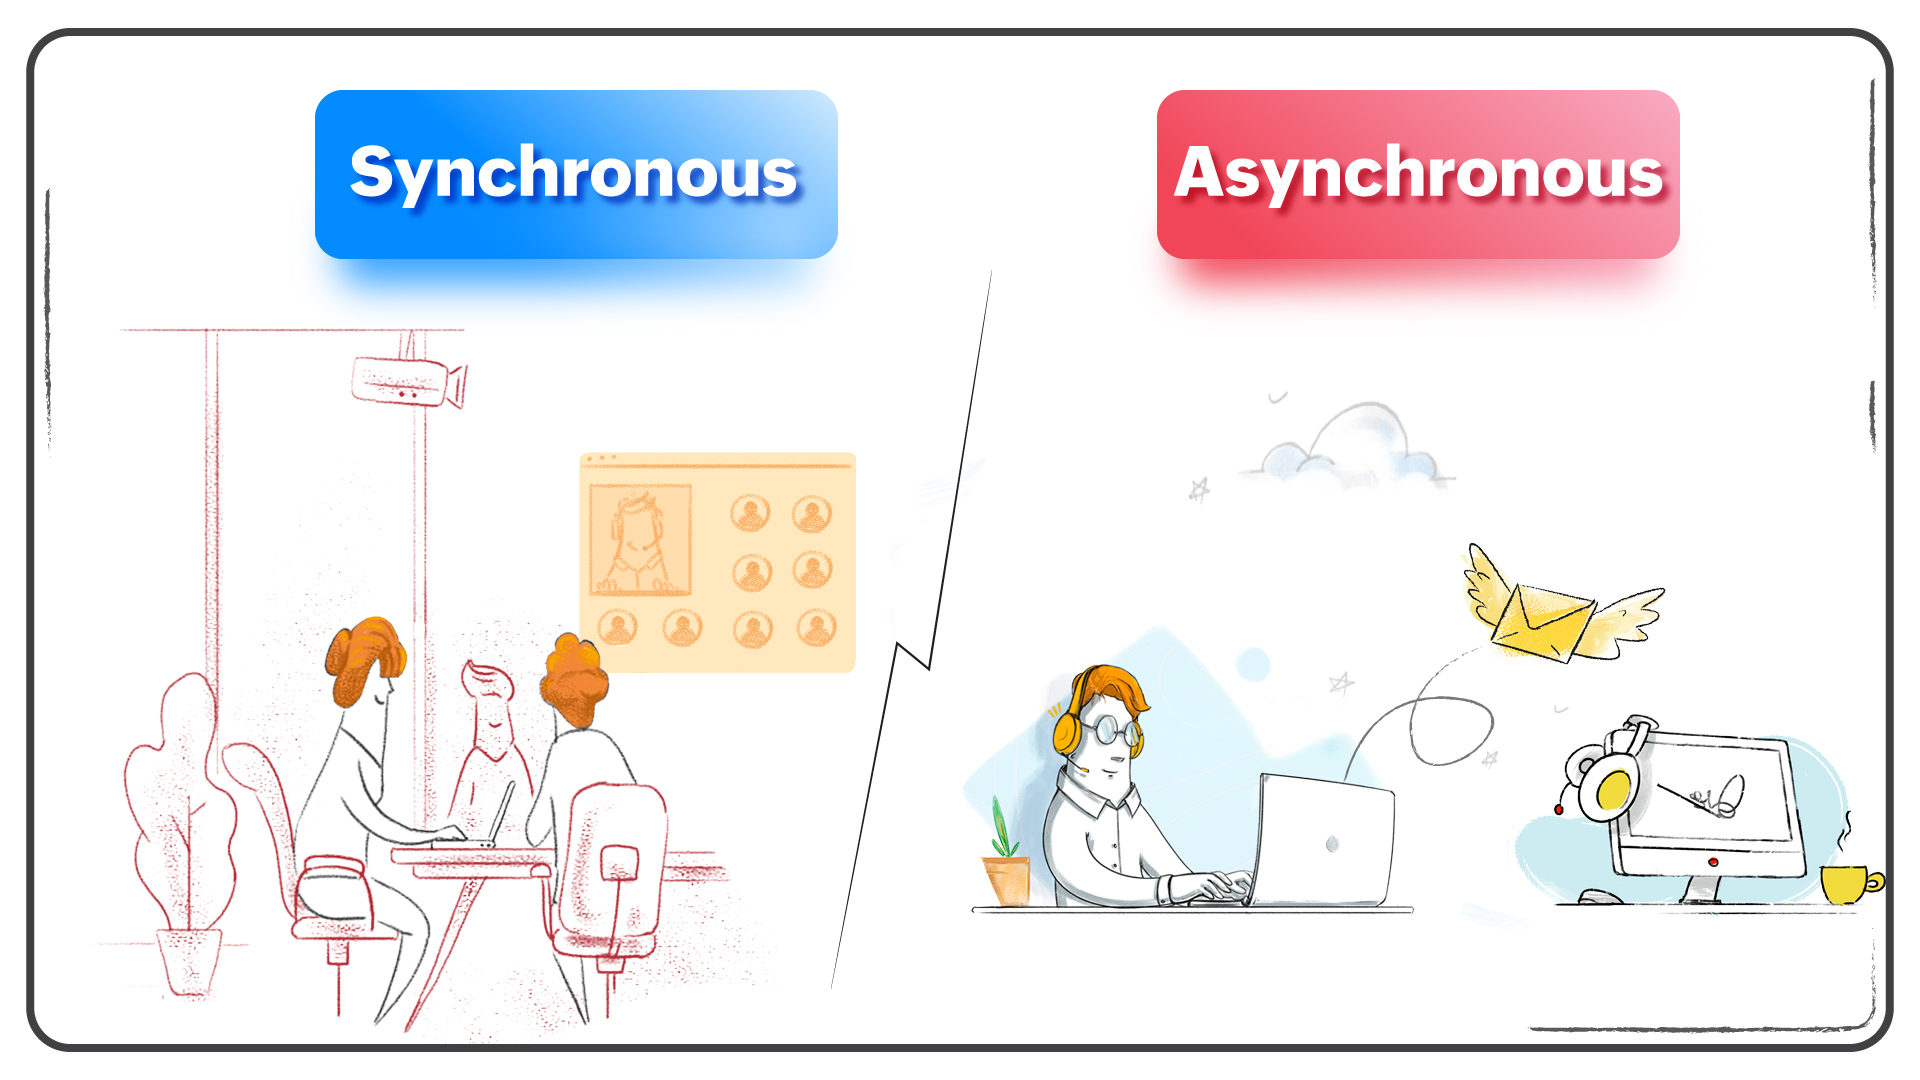 synchronous-and-asynchronous-communication-in-hybrid-work